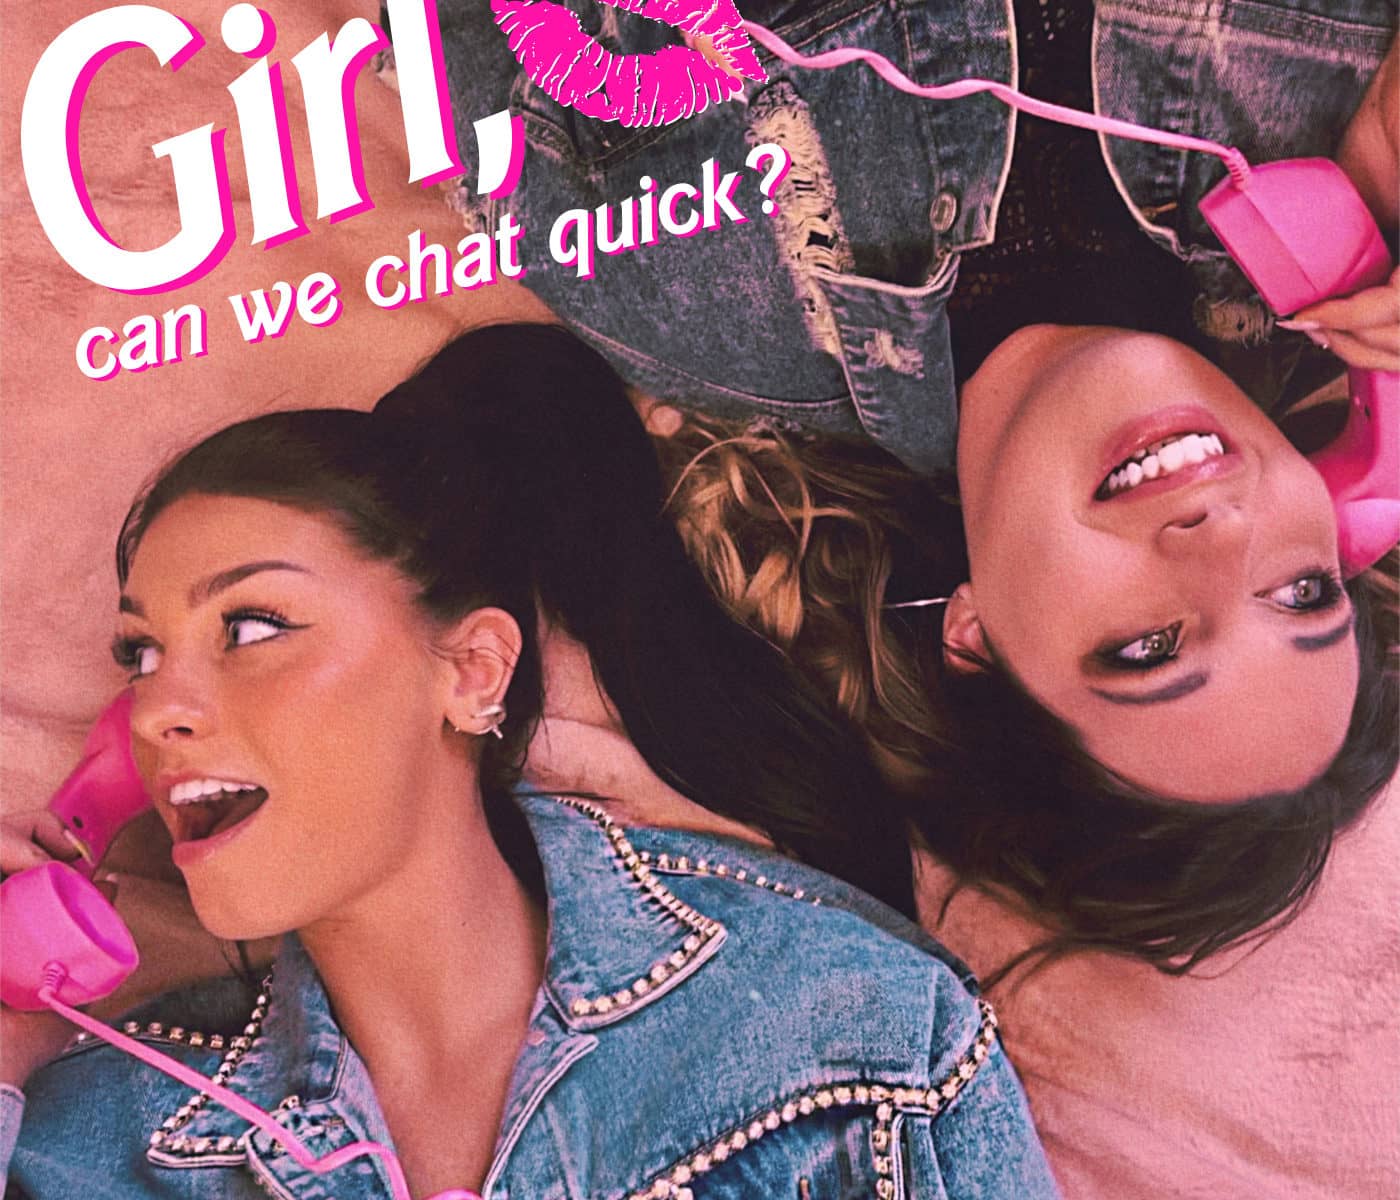 girl_can_we_chat_quick_podcast-25